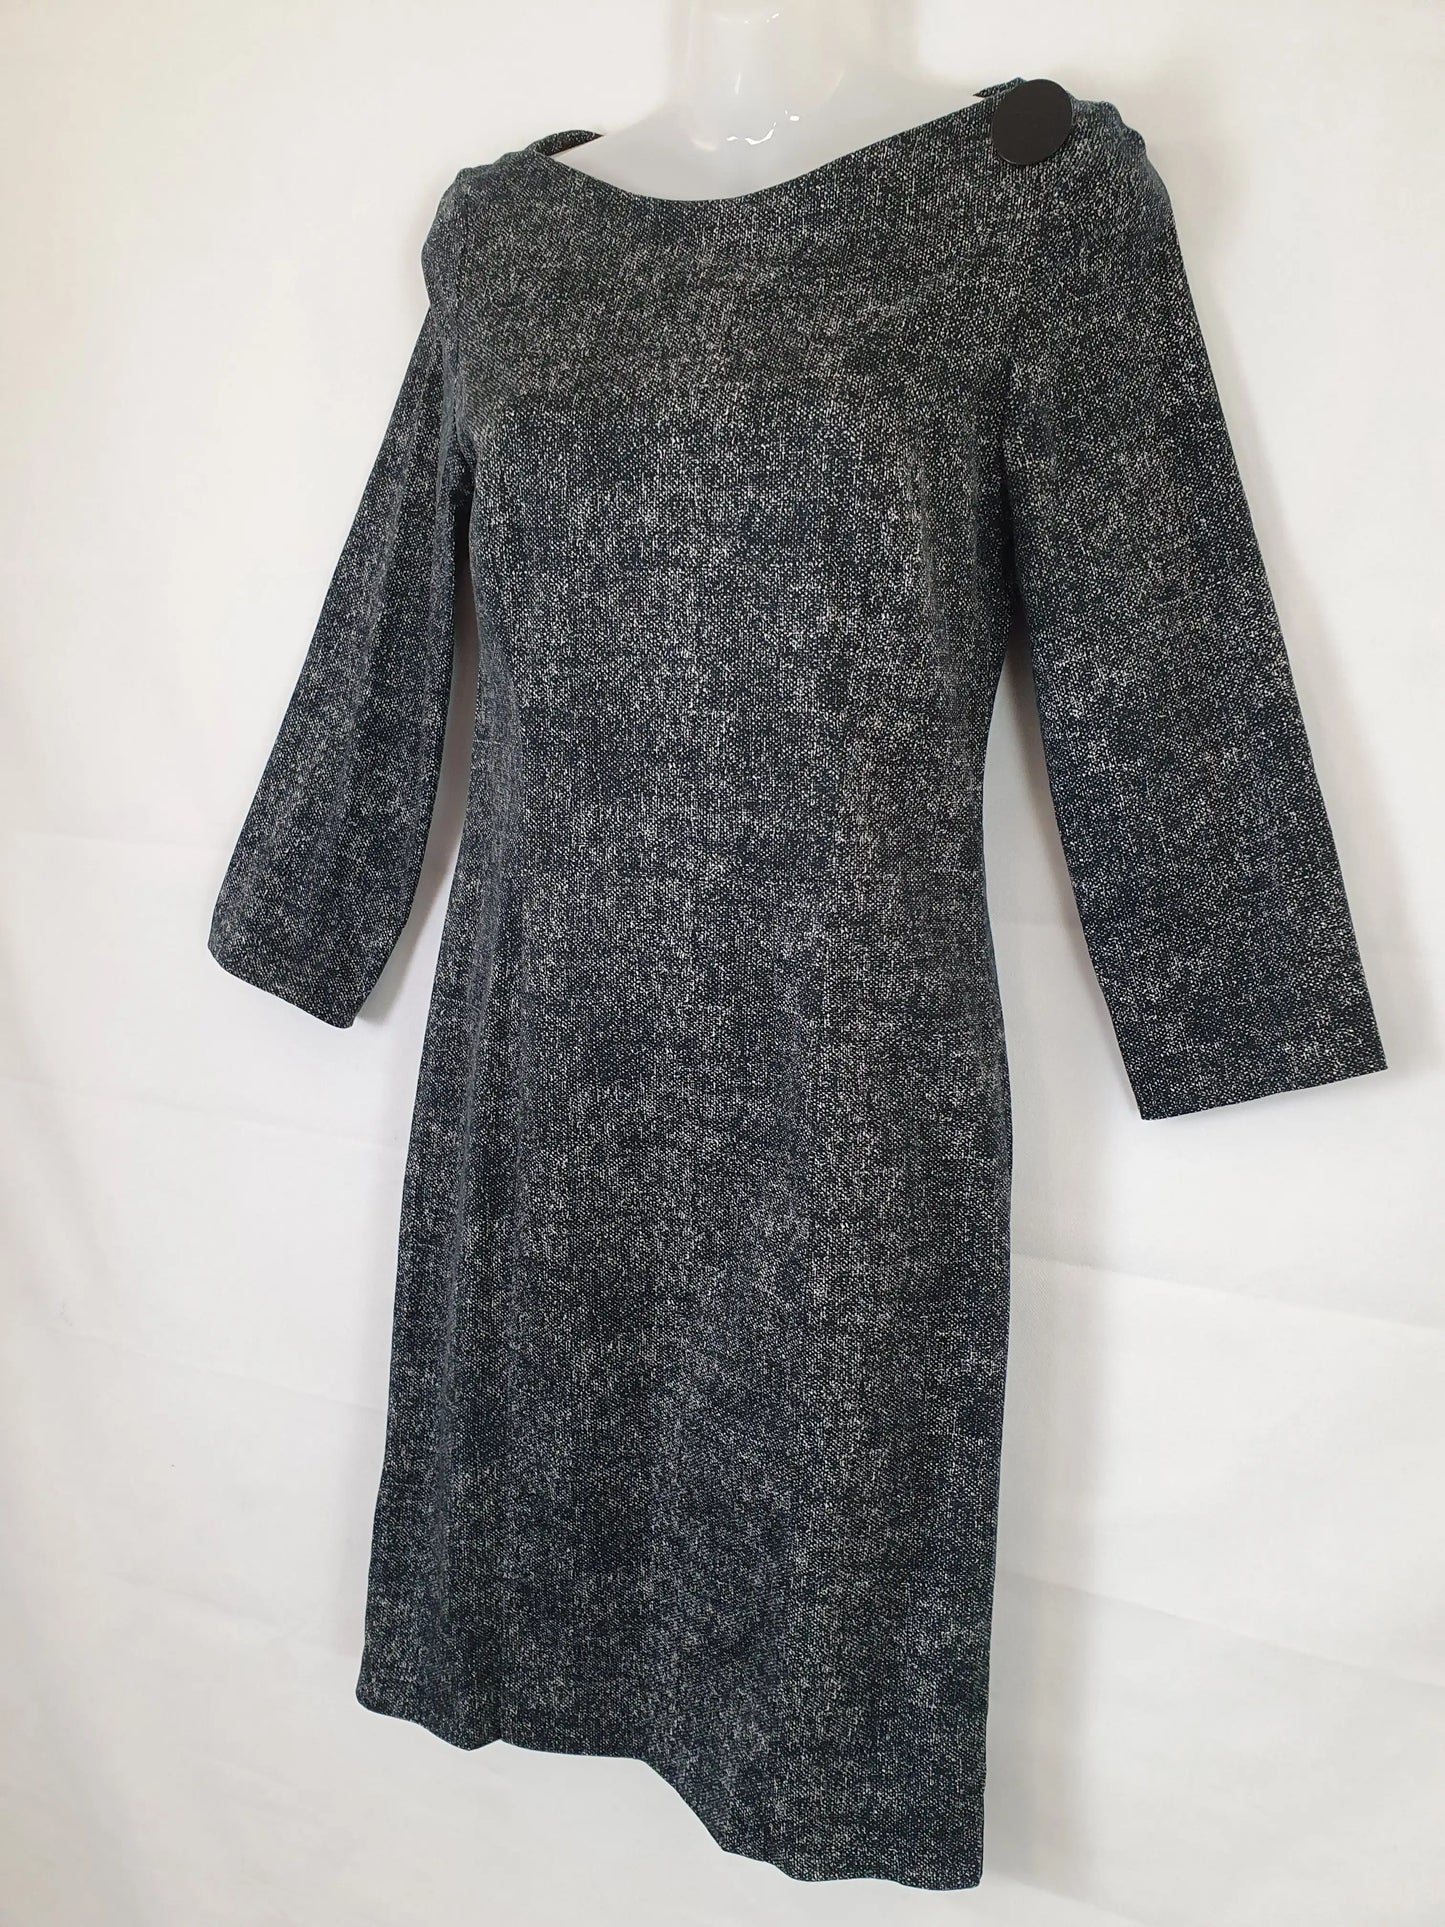 Veronika Maine Office Style Midi Dress Size 6 by SwapUp-Second Hand Shop-Thrift Store-Op Shop 